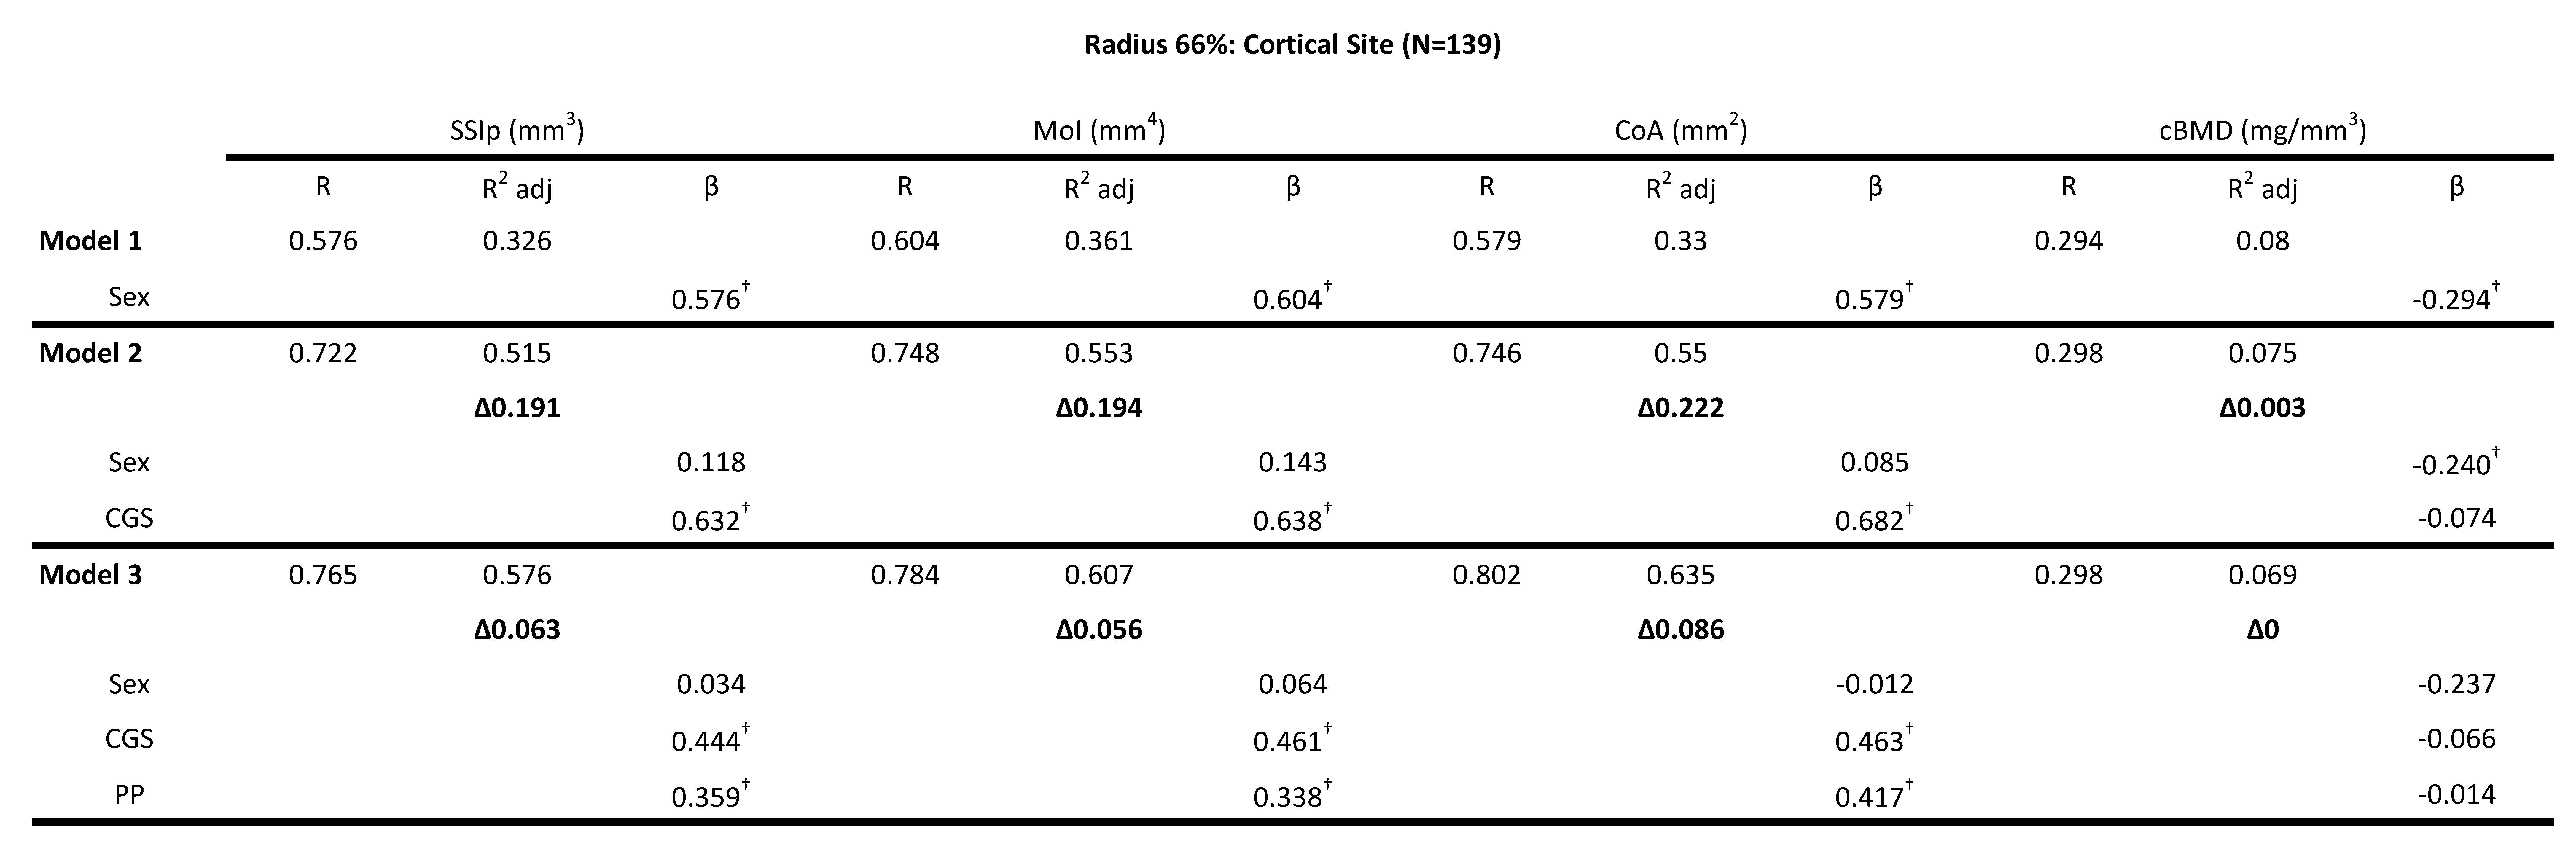 <b>Table 5</b>: Hierarchical multiple regression (HMR) analyses for predicting Bone Strength Index, SSIp (mm<sup>3</sup>)- Strength Strain Index, MoI (mm<sup>4</sup>)- polar Moment of inertia, CoA (mm<sup>2</sup>) - Cortical Area, cBMD (mg/mm<sup>3</sup>)-Cortical Bone Mineral Density at the 66\% radial site using sex, absolute combined grip strength (CGS) and peak power (PP) as predictor variables. &beta; is the Standardized beta coefficient indicates the predictive power. Adjusted coefficient of determination (R<sup>2</sup> Adj) provides the amount of variation explained by the regression model. &Delta; indicates change in R<sup>2</sup> from model 1 (bold). &dagger; Indicates a significant &beta;